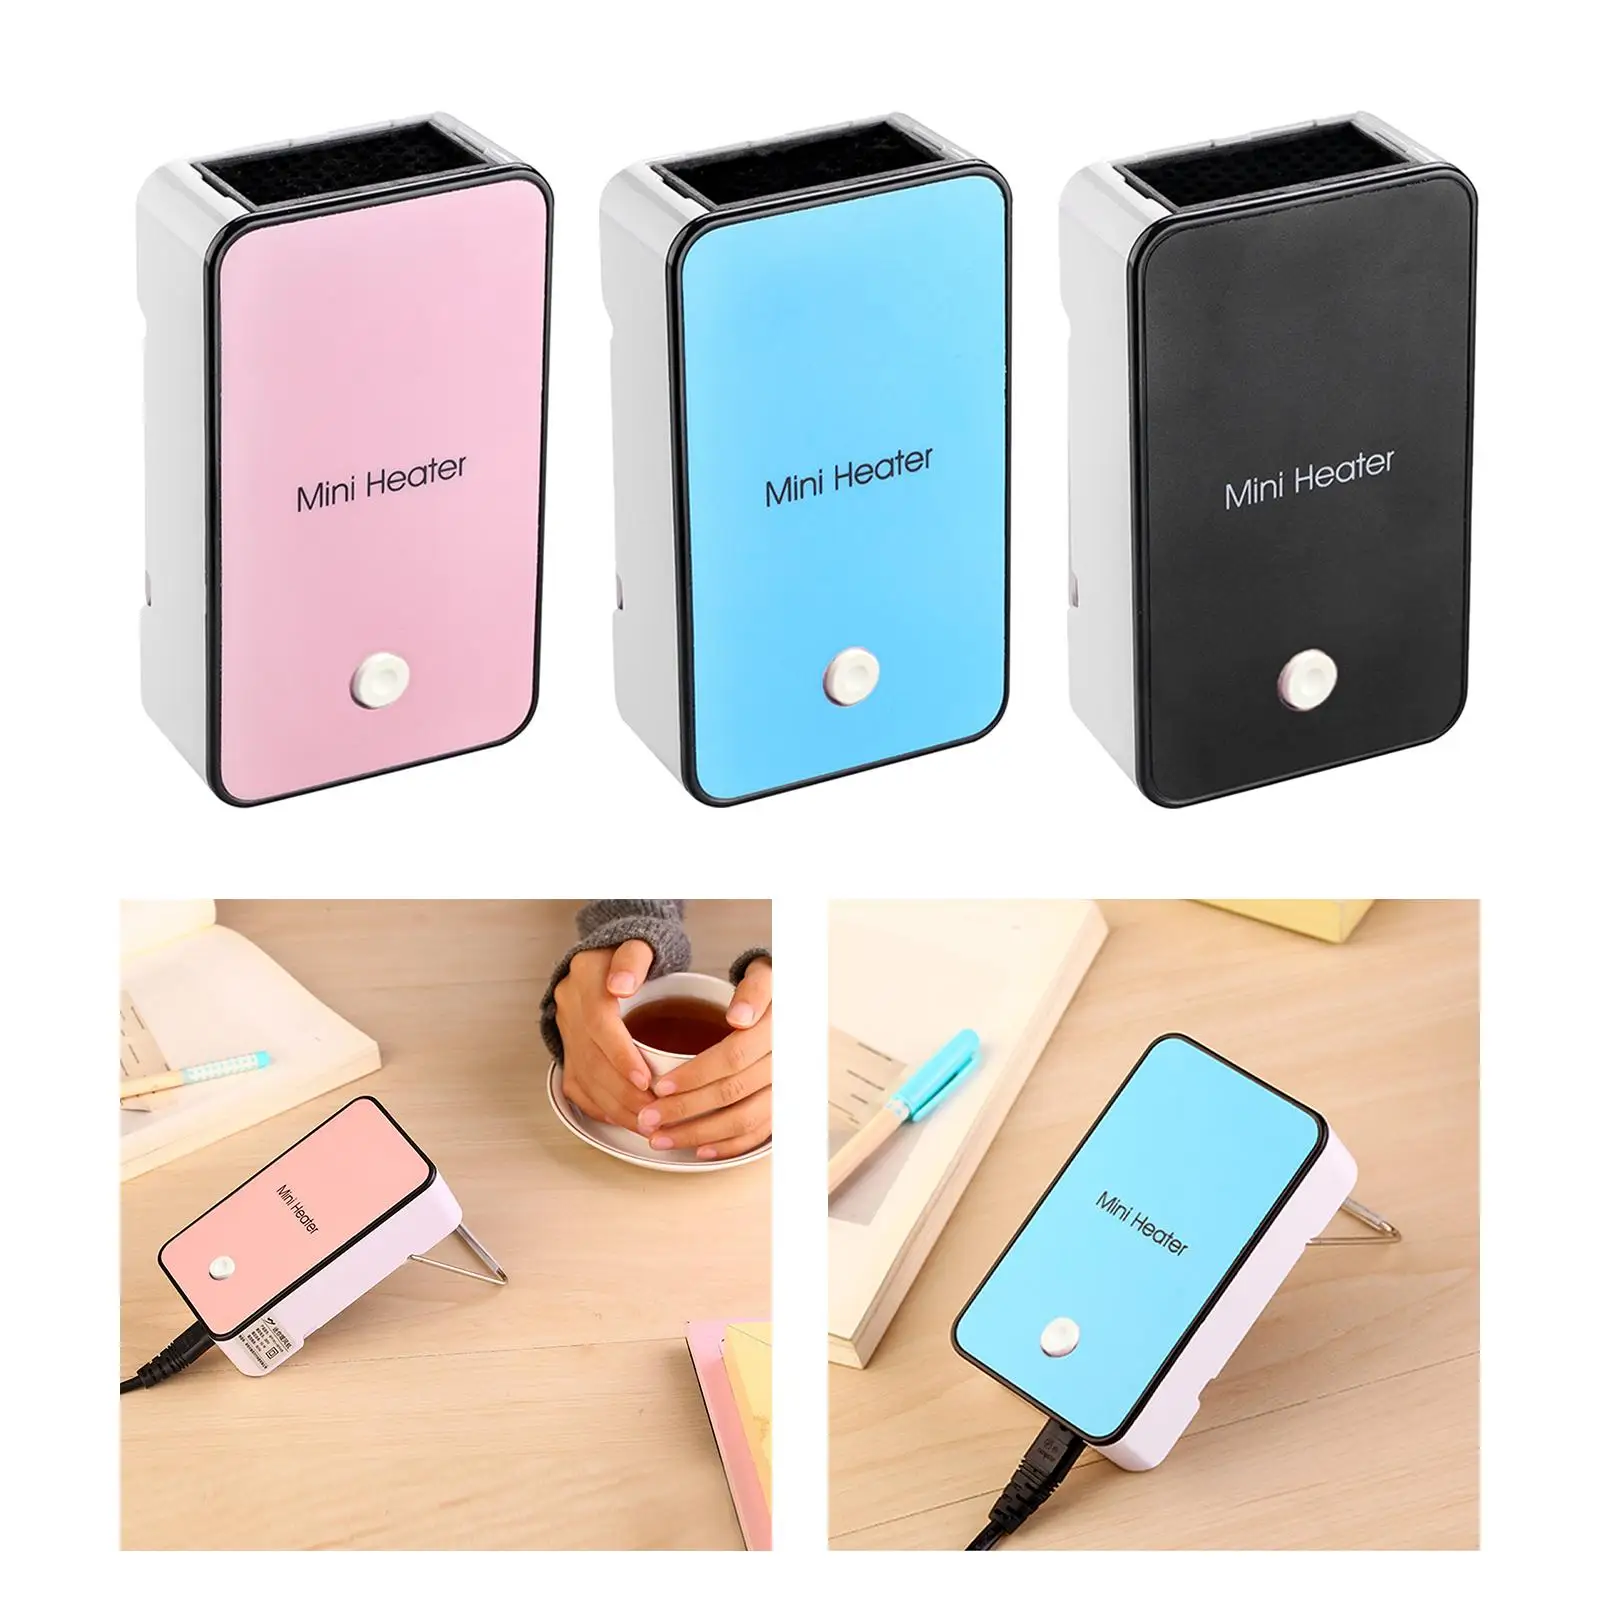 USB Rechargeable Mini Heater Heating Tool Gifts Electric Fan Heaters Air Warmer for Indoor Desktop Traveling Camping Adults Kids